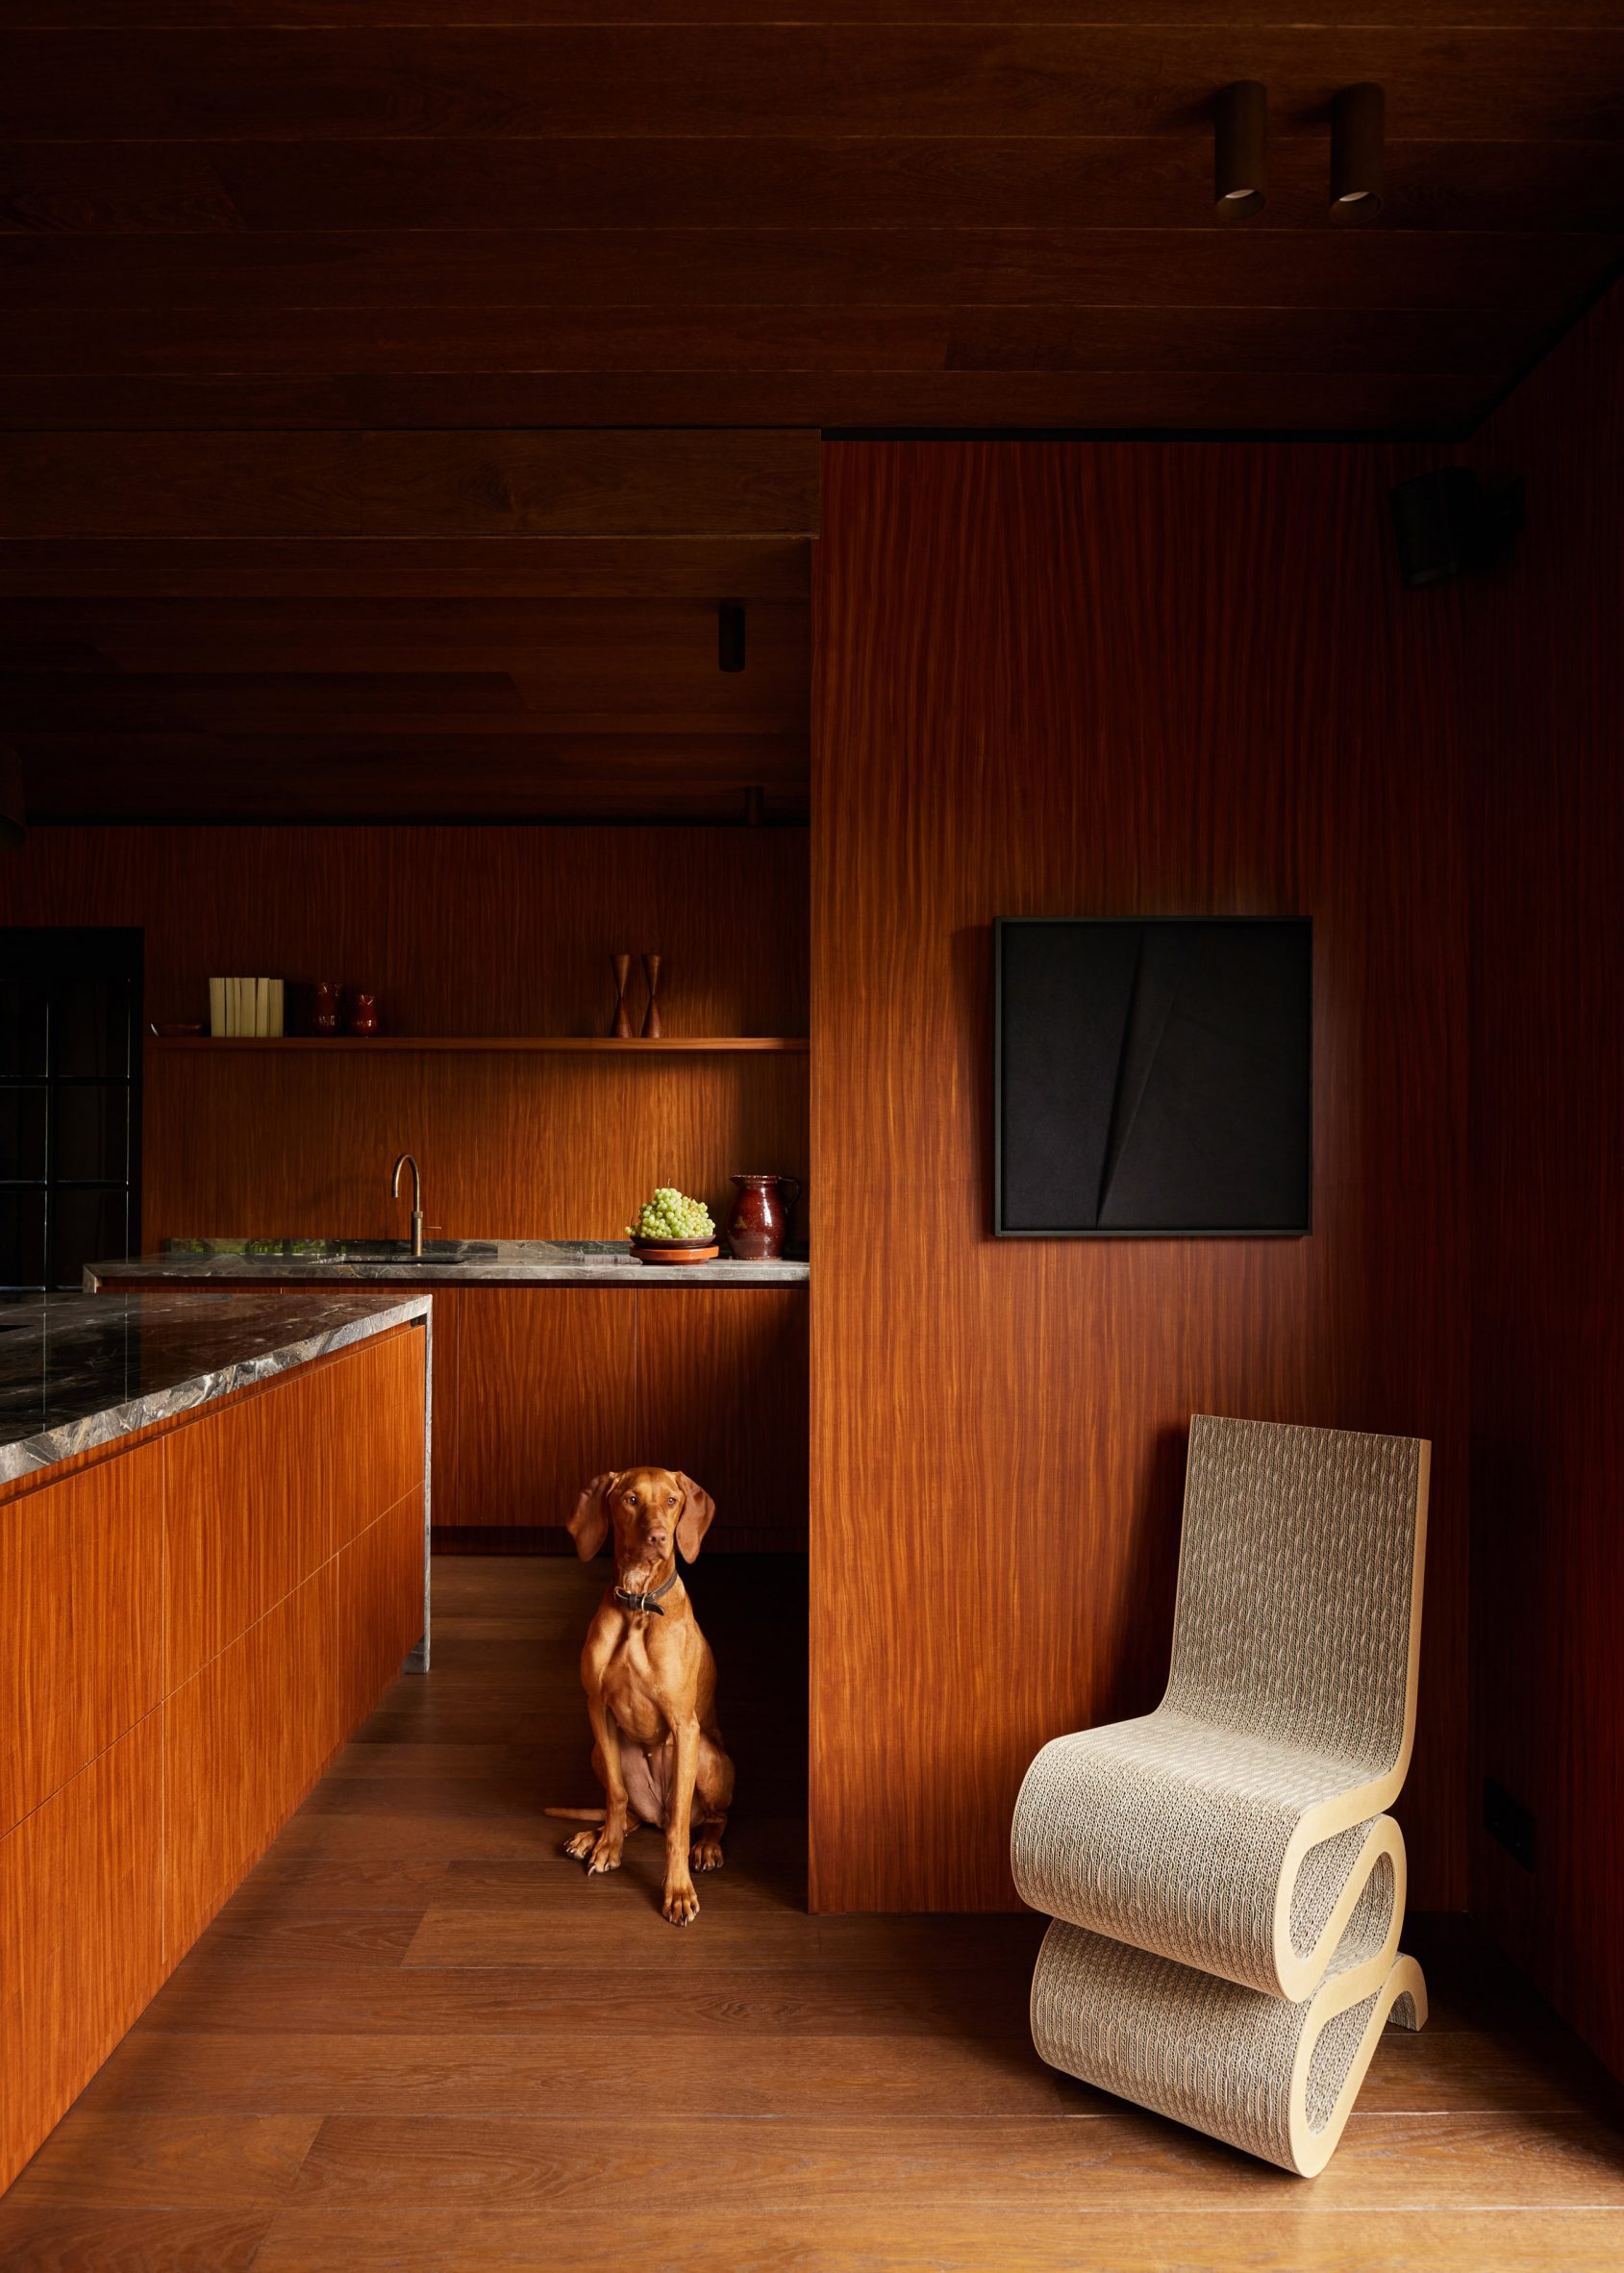 Kitchen interior by DAB Studio with wood-lined walls, floors and cabinets